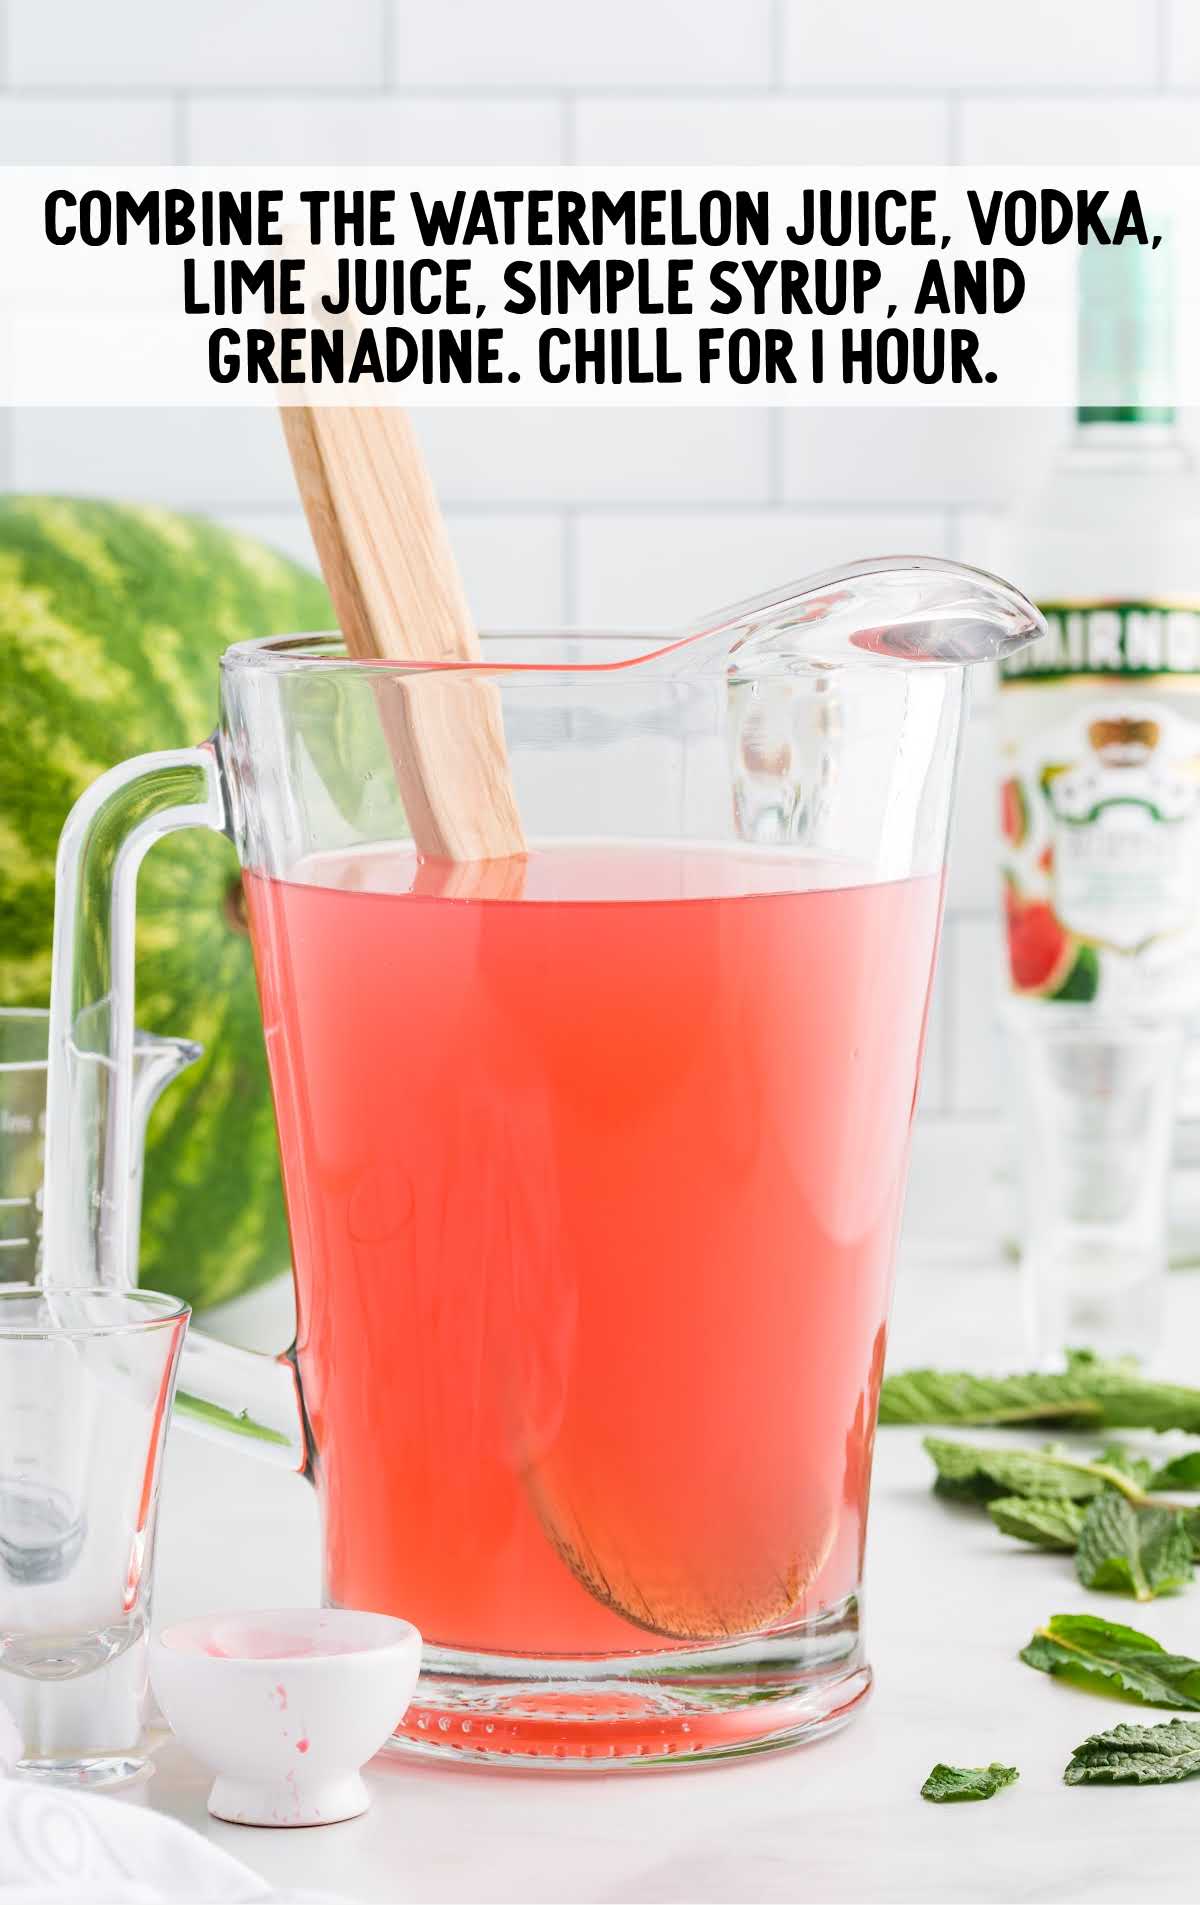 watermelon juice, vodka, lime juice, simple syrup, and grenadine combine in a pitcher